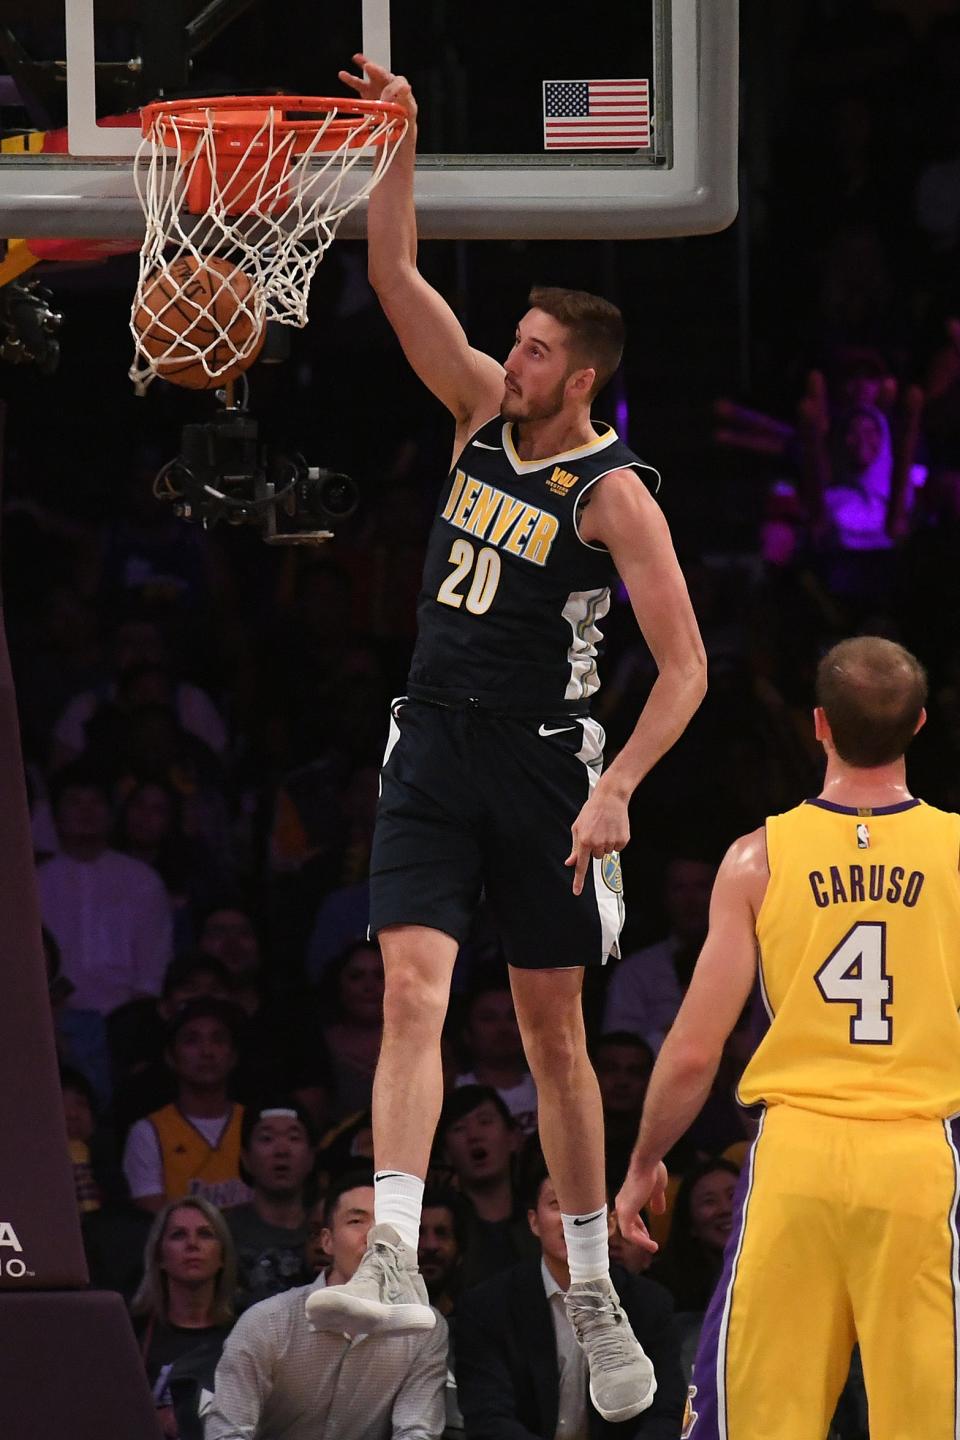 Denver Nuggets forward Tyler Lydon dunks the ball in front of Los Angeles Lakers guard Alex Caruso on Oct. 2, 2017 in Los Angeles.